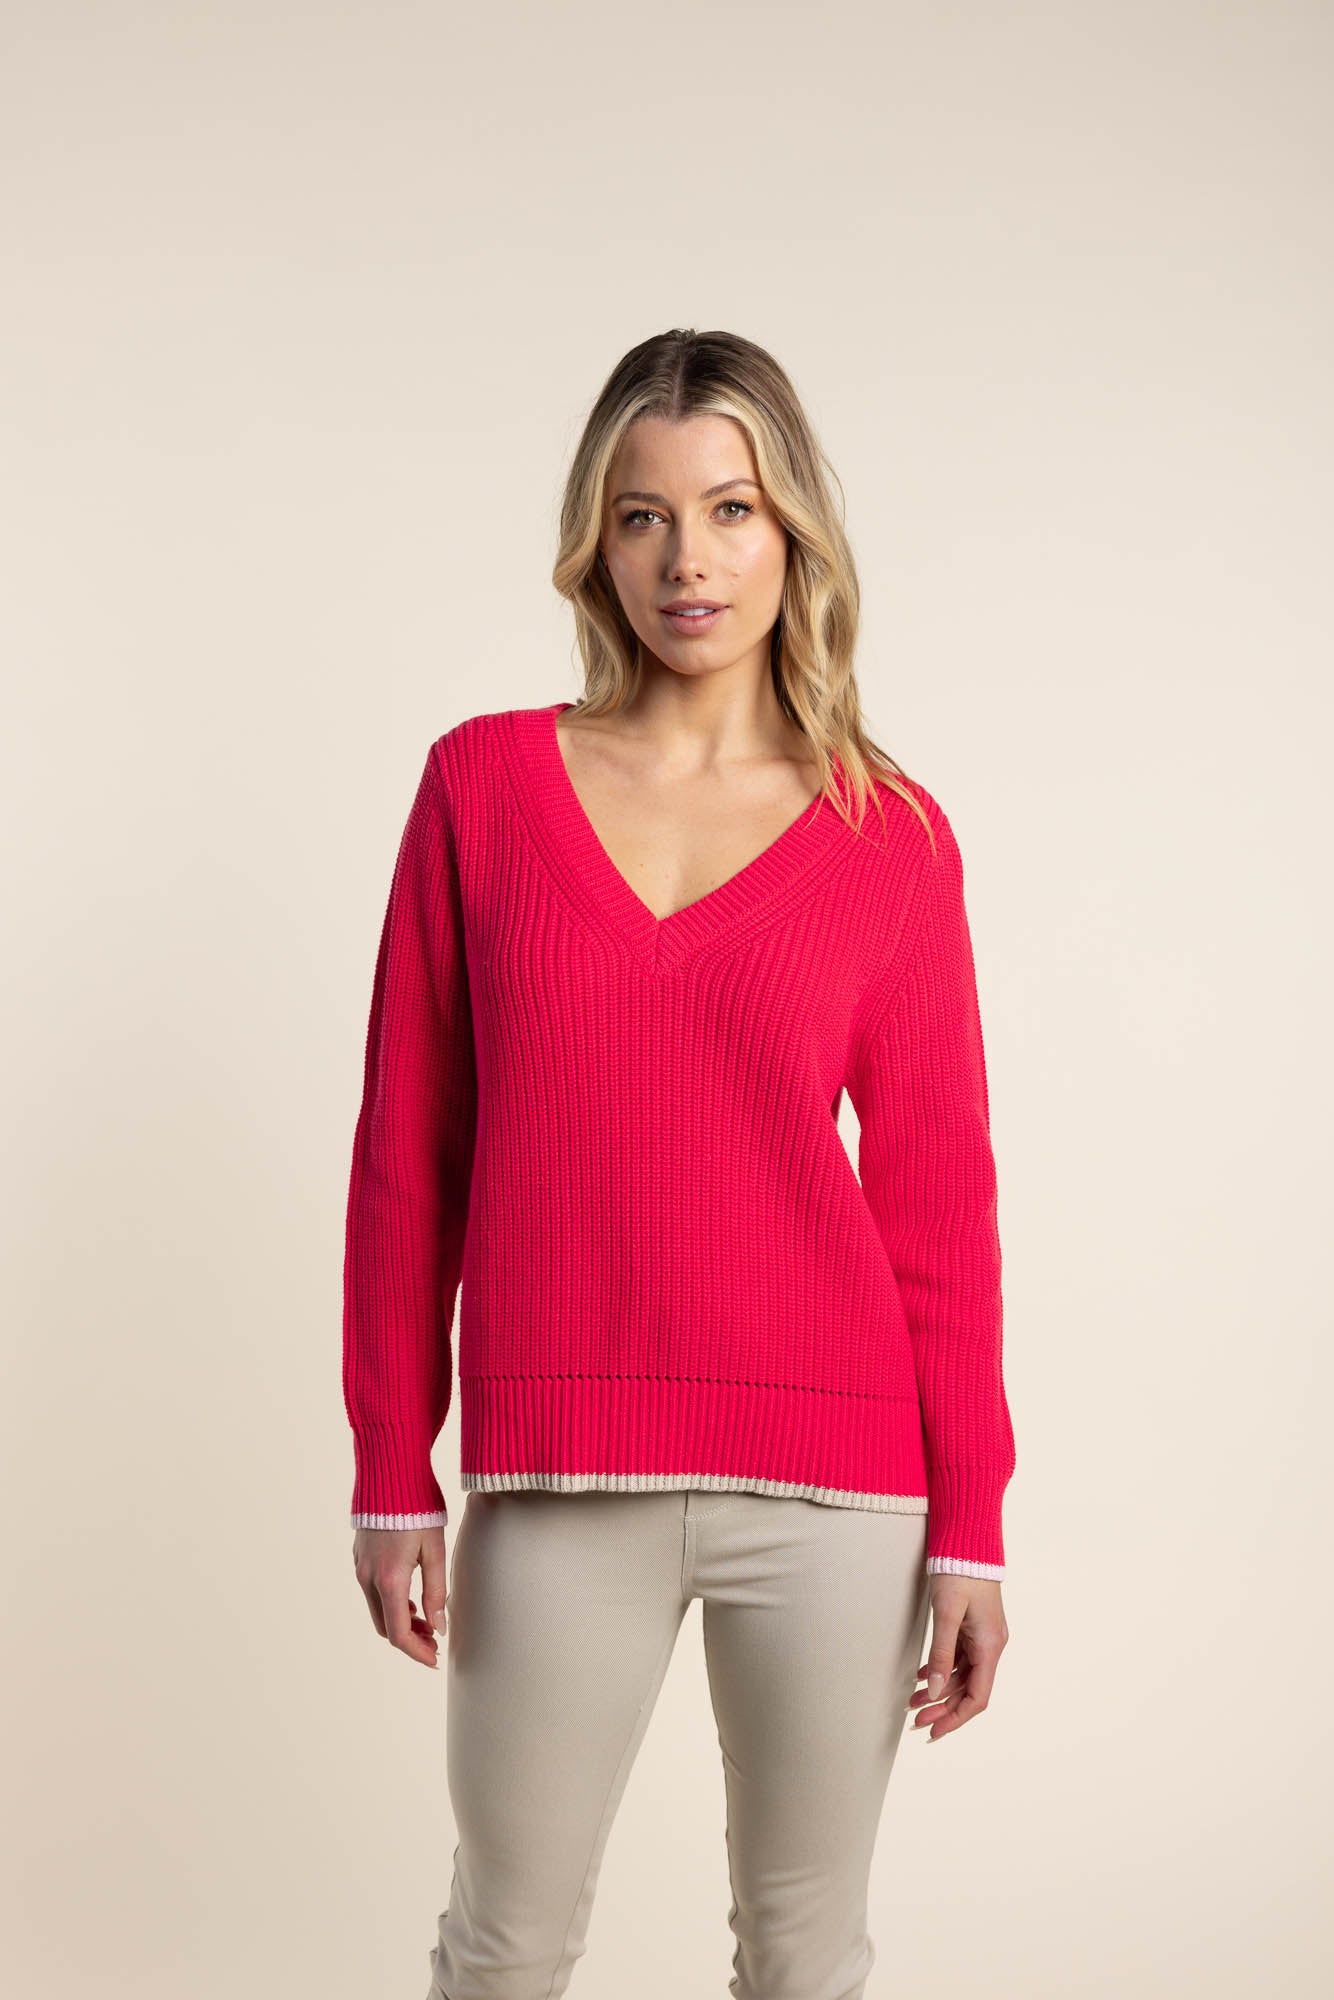 Two T's V Neck with Contrast Tipping - Paradise Pink